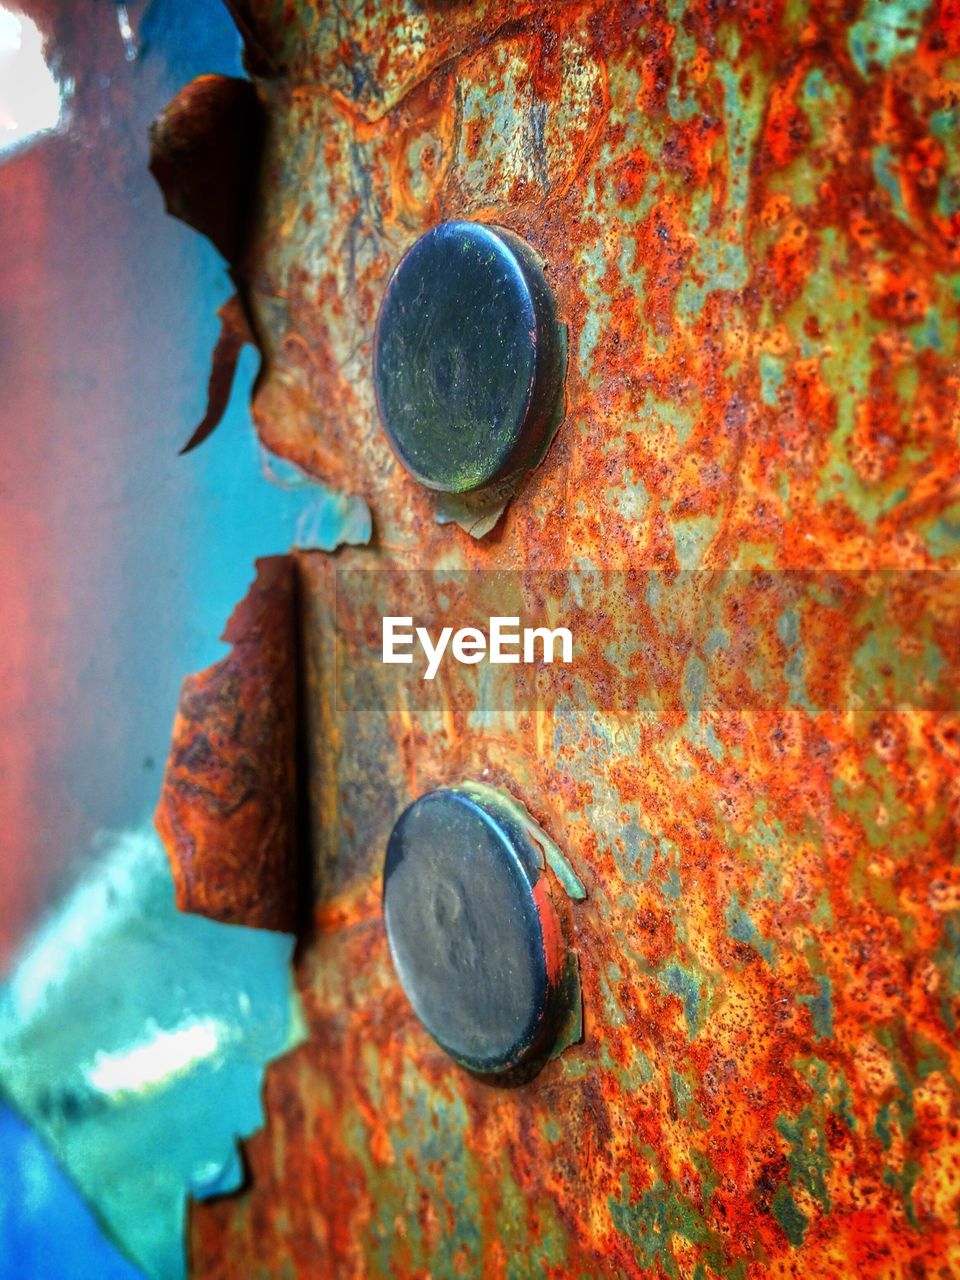 EXTREME CLOSE UP OF RUSTY METAL